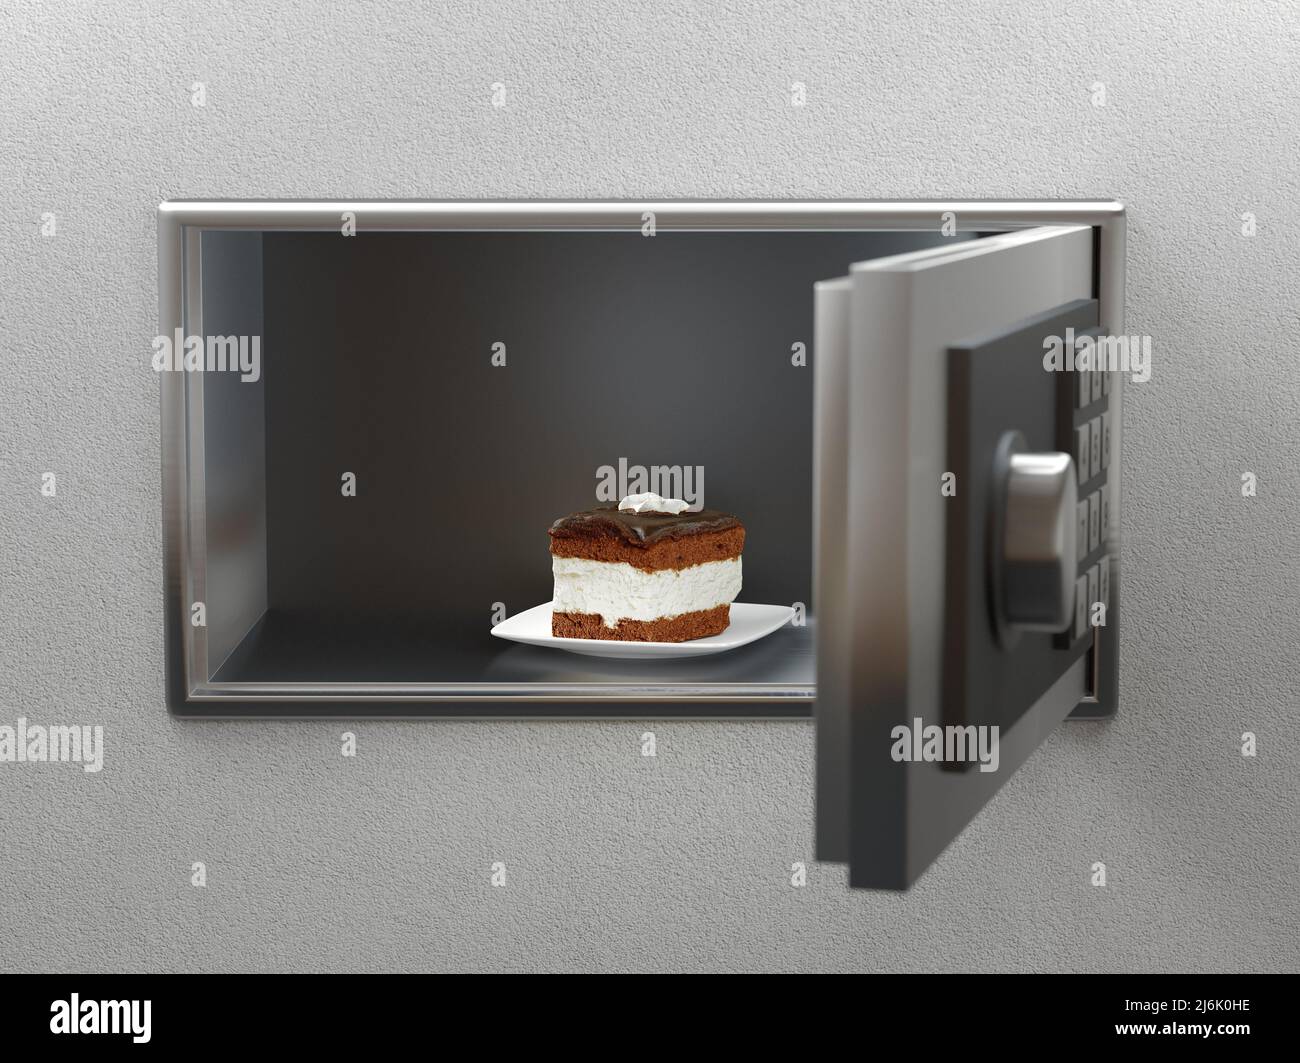 Sweet Food in the safe. Concept of Junk or Unhealthy Food, forbidden fatty foods. 3d rendering Stock Photo